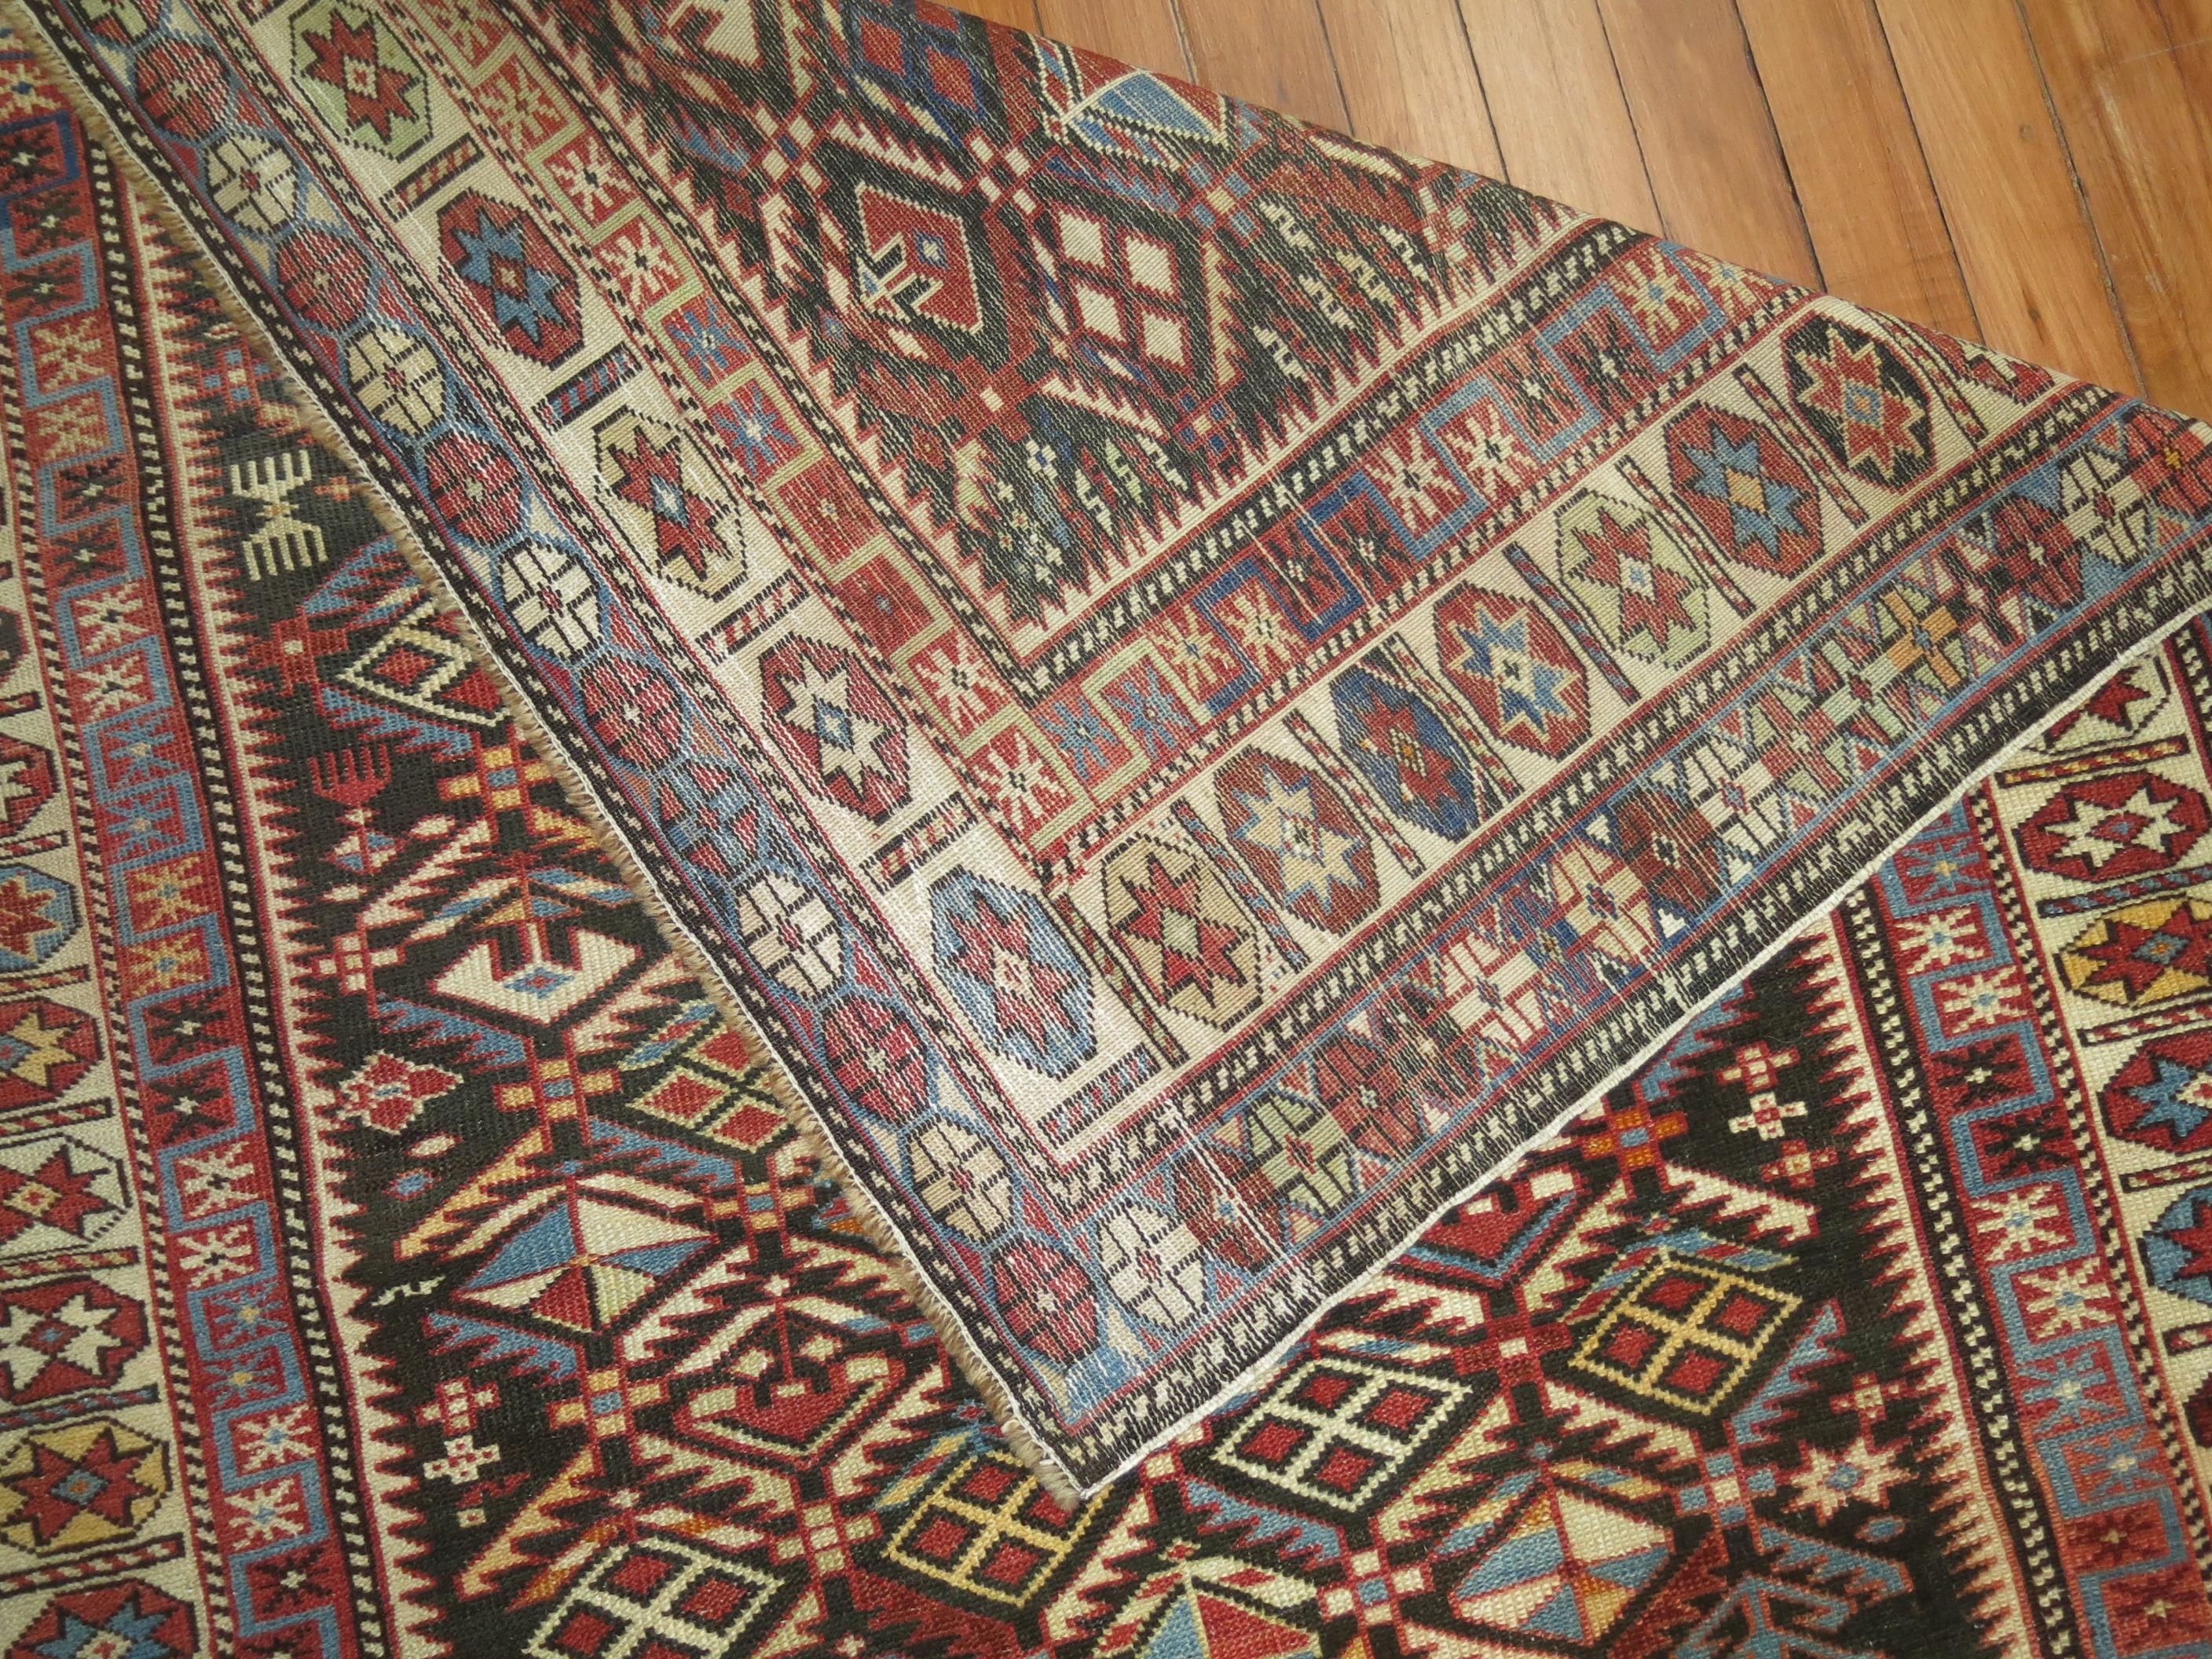 A geometric tribal looking Caucasian shirvan rug from the early 20th century

Antique Caucasian rugs from the Shirvan district village are still considered one of the best decorative and collector type of rugs from that the Caucasian